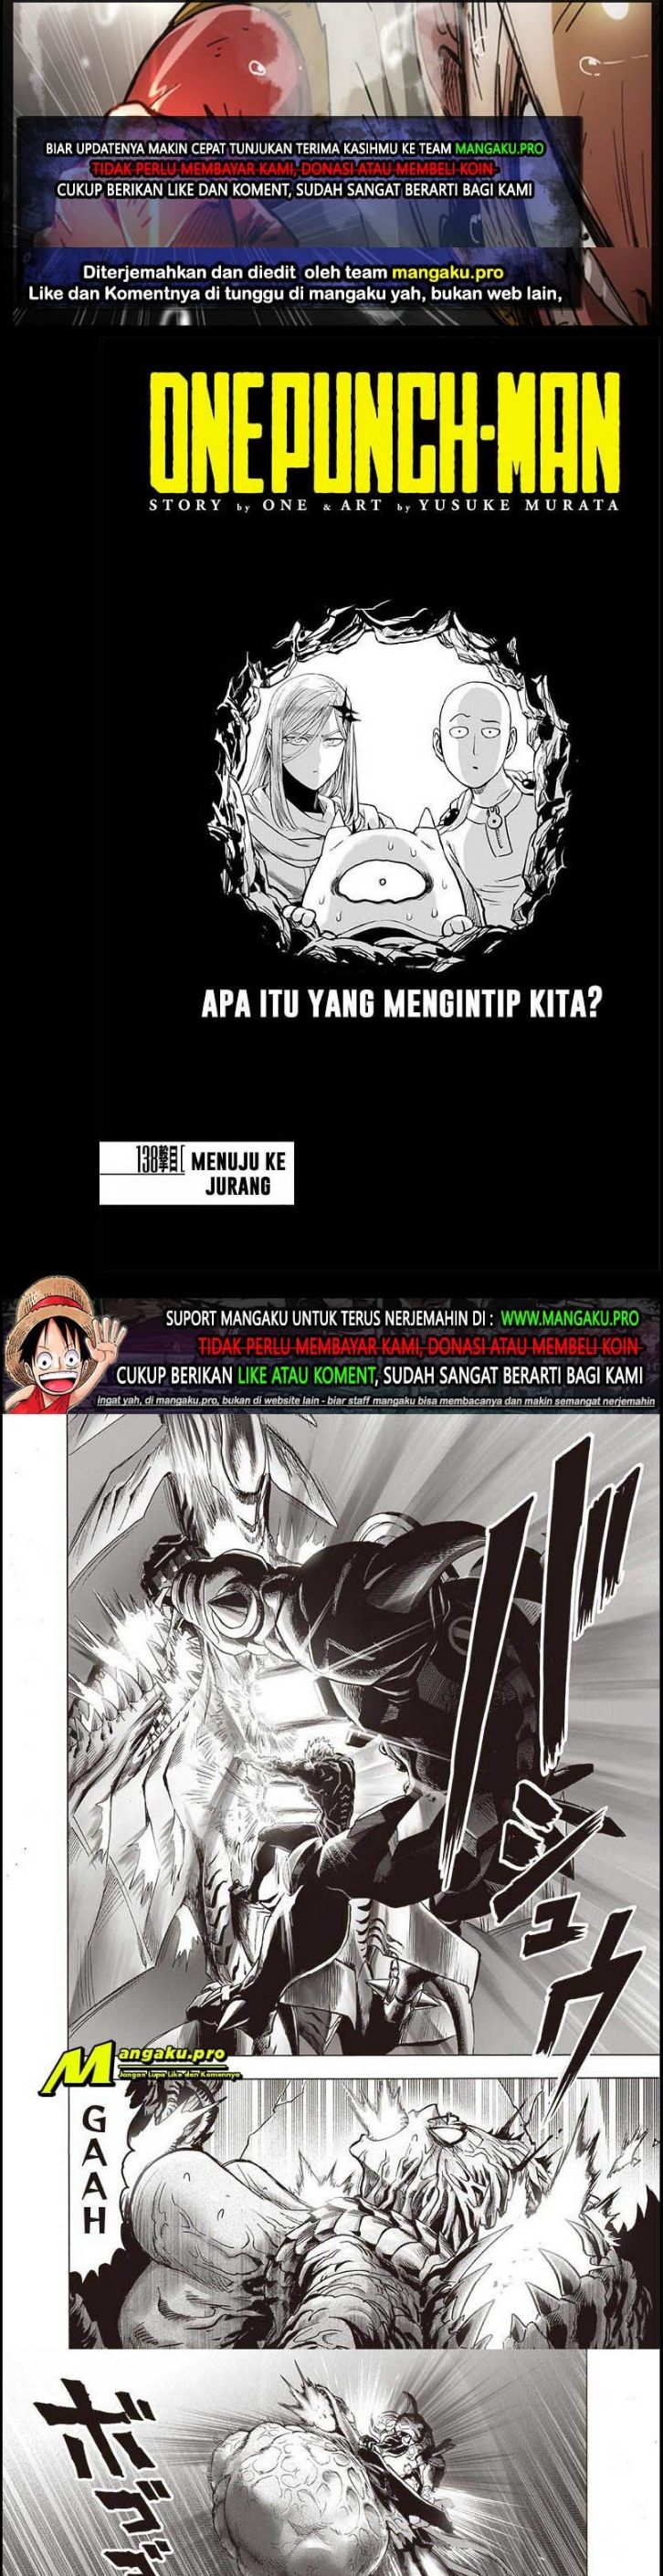 One Punch Man Chapter 188